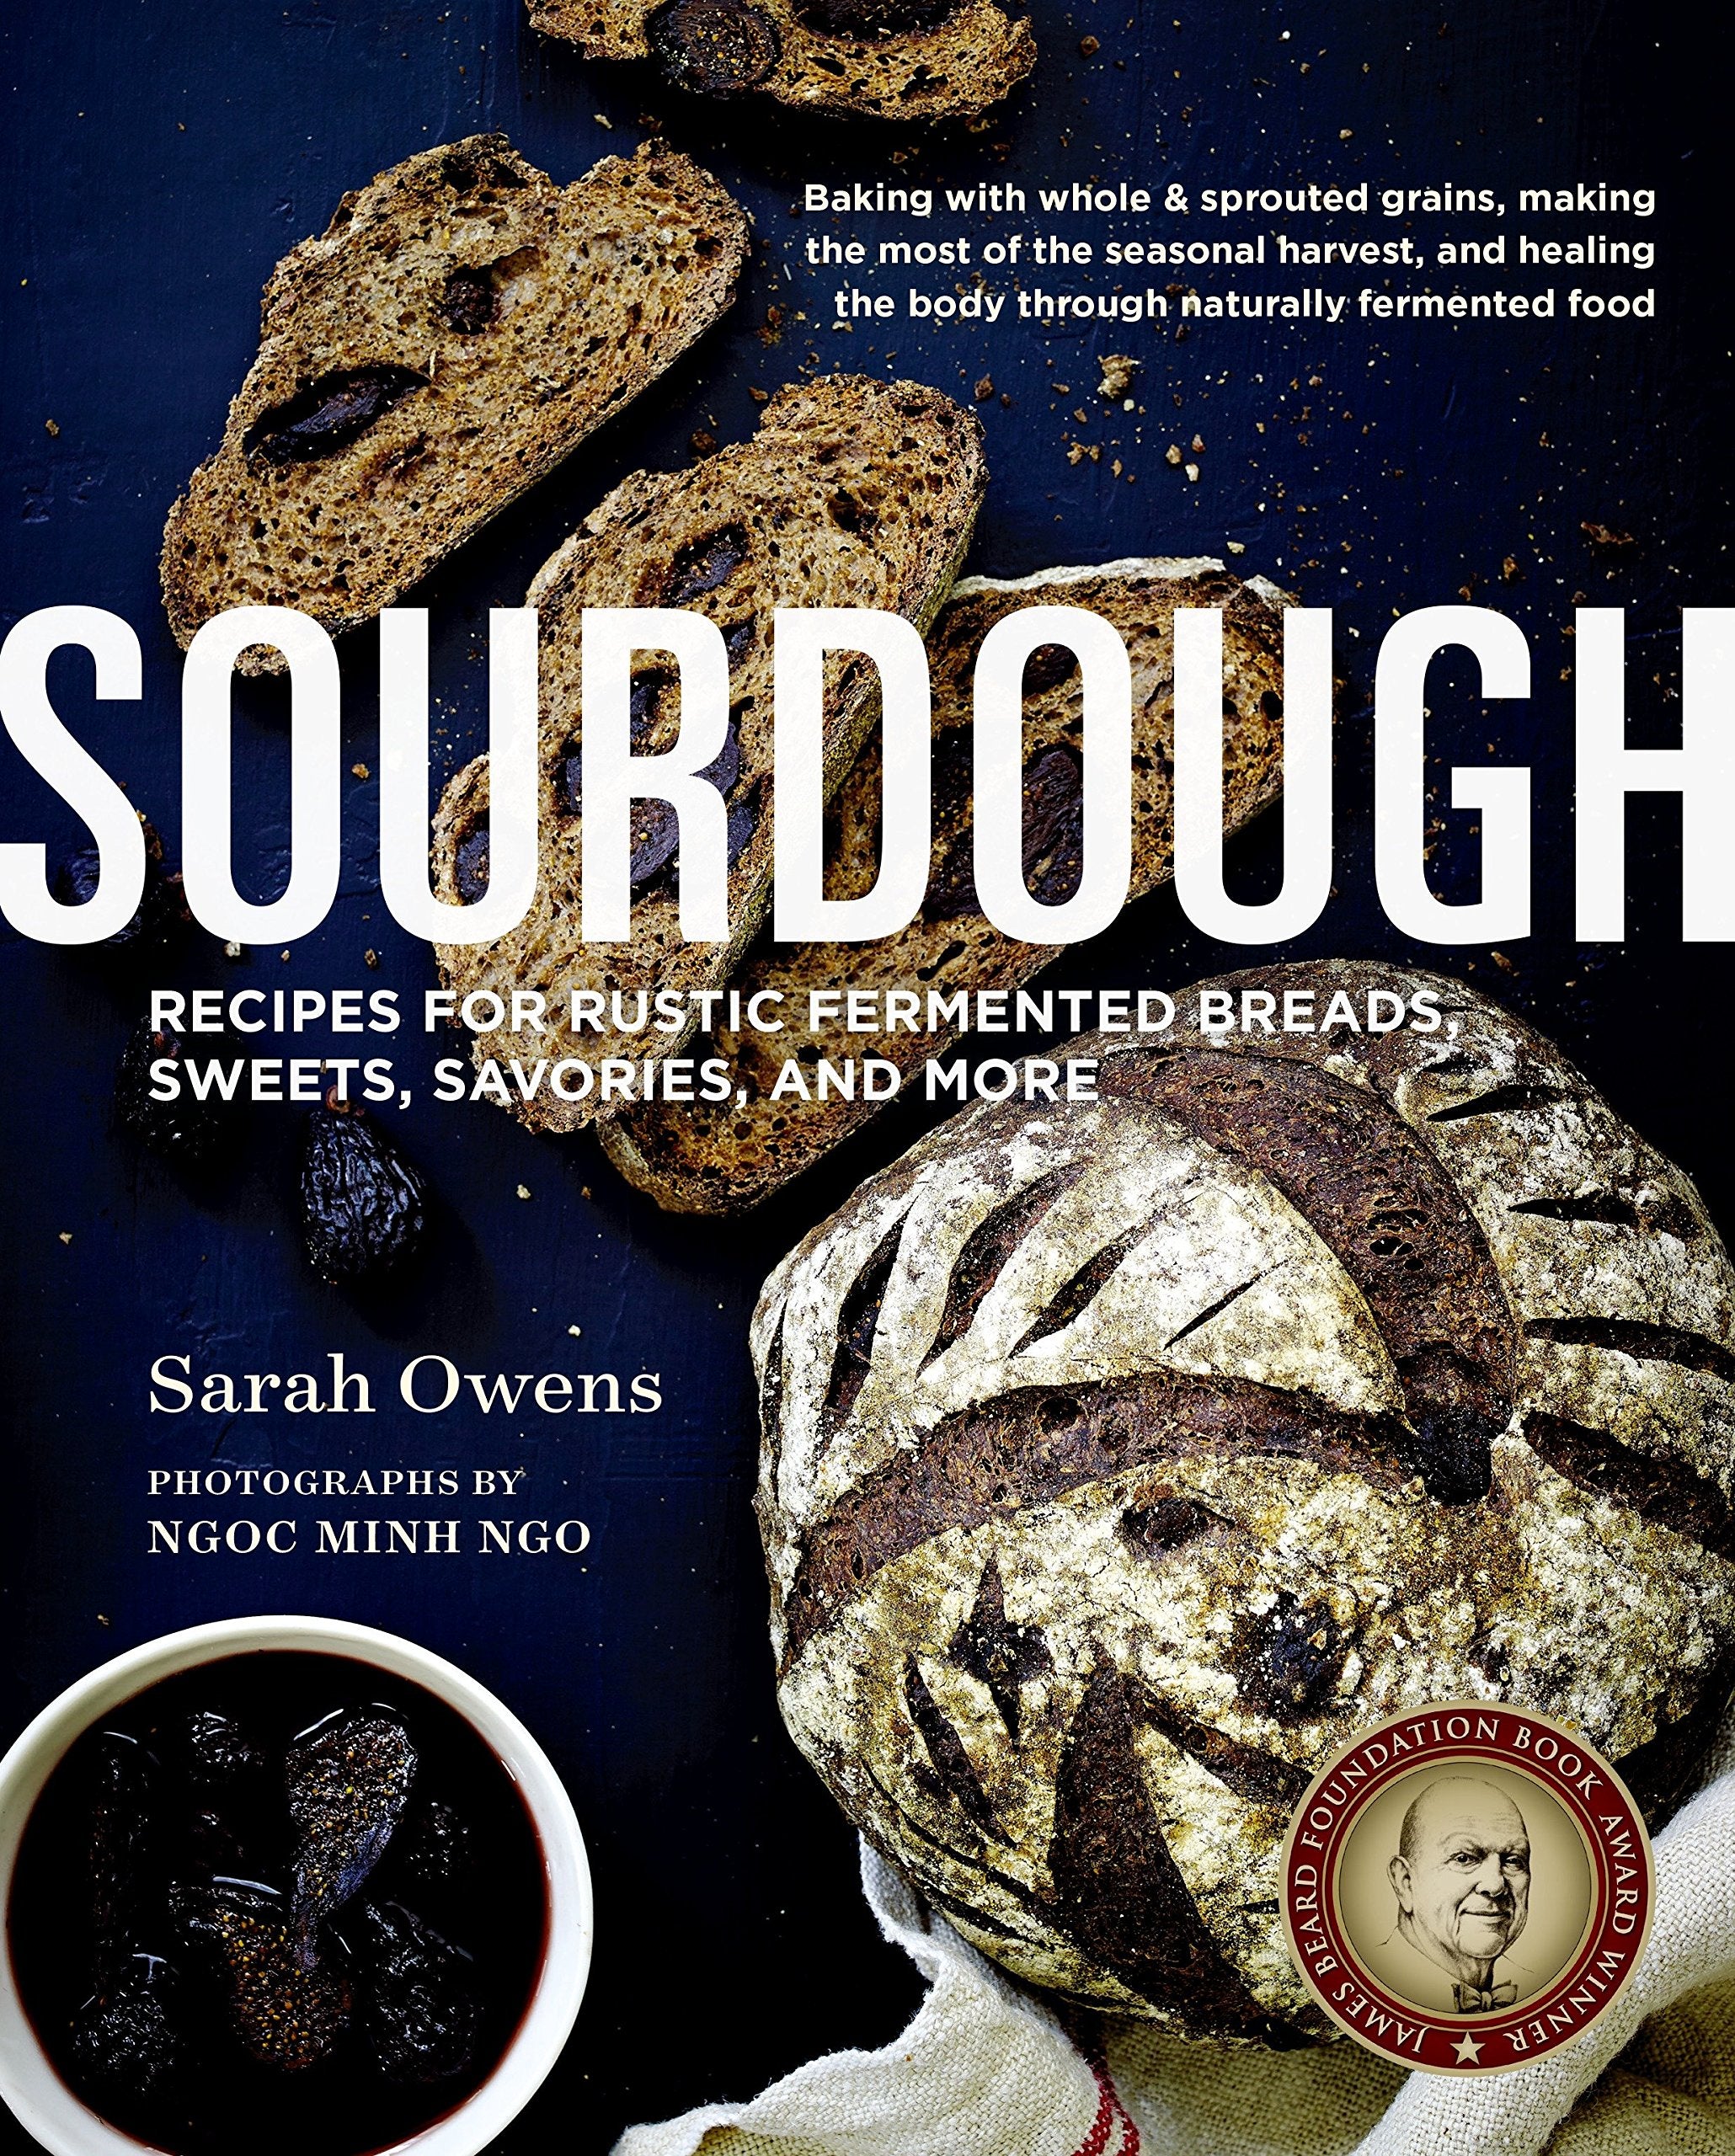 Sourdough: Recipes for Rustic Fermented Breads, Sweets, Savories, and More (Sarah Owens)